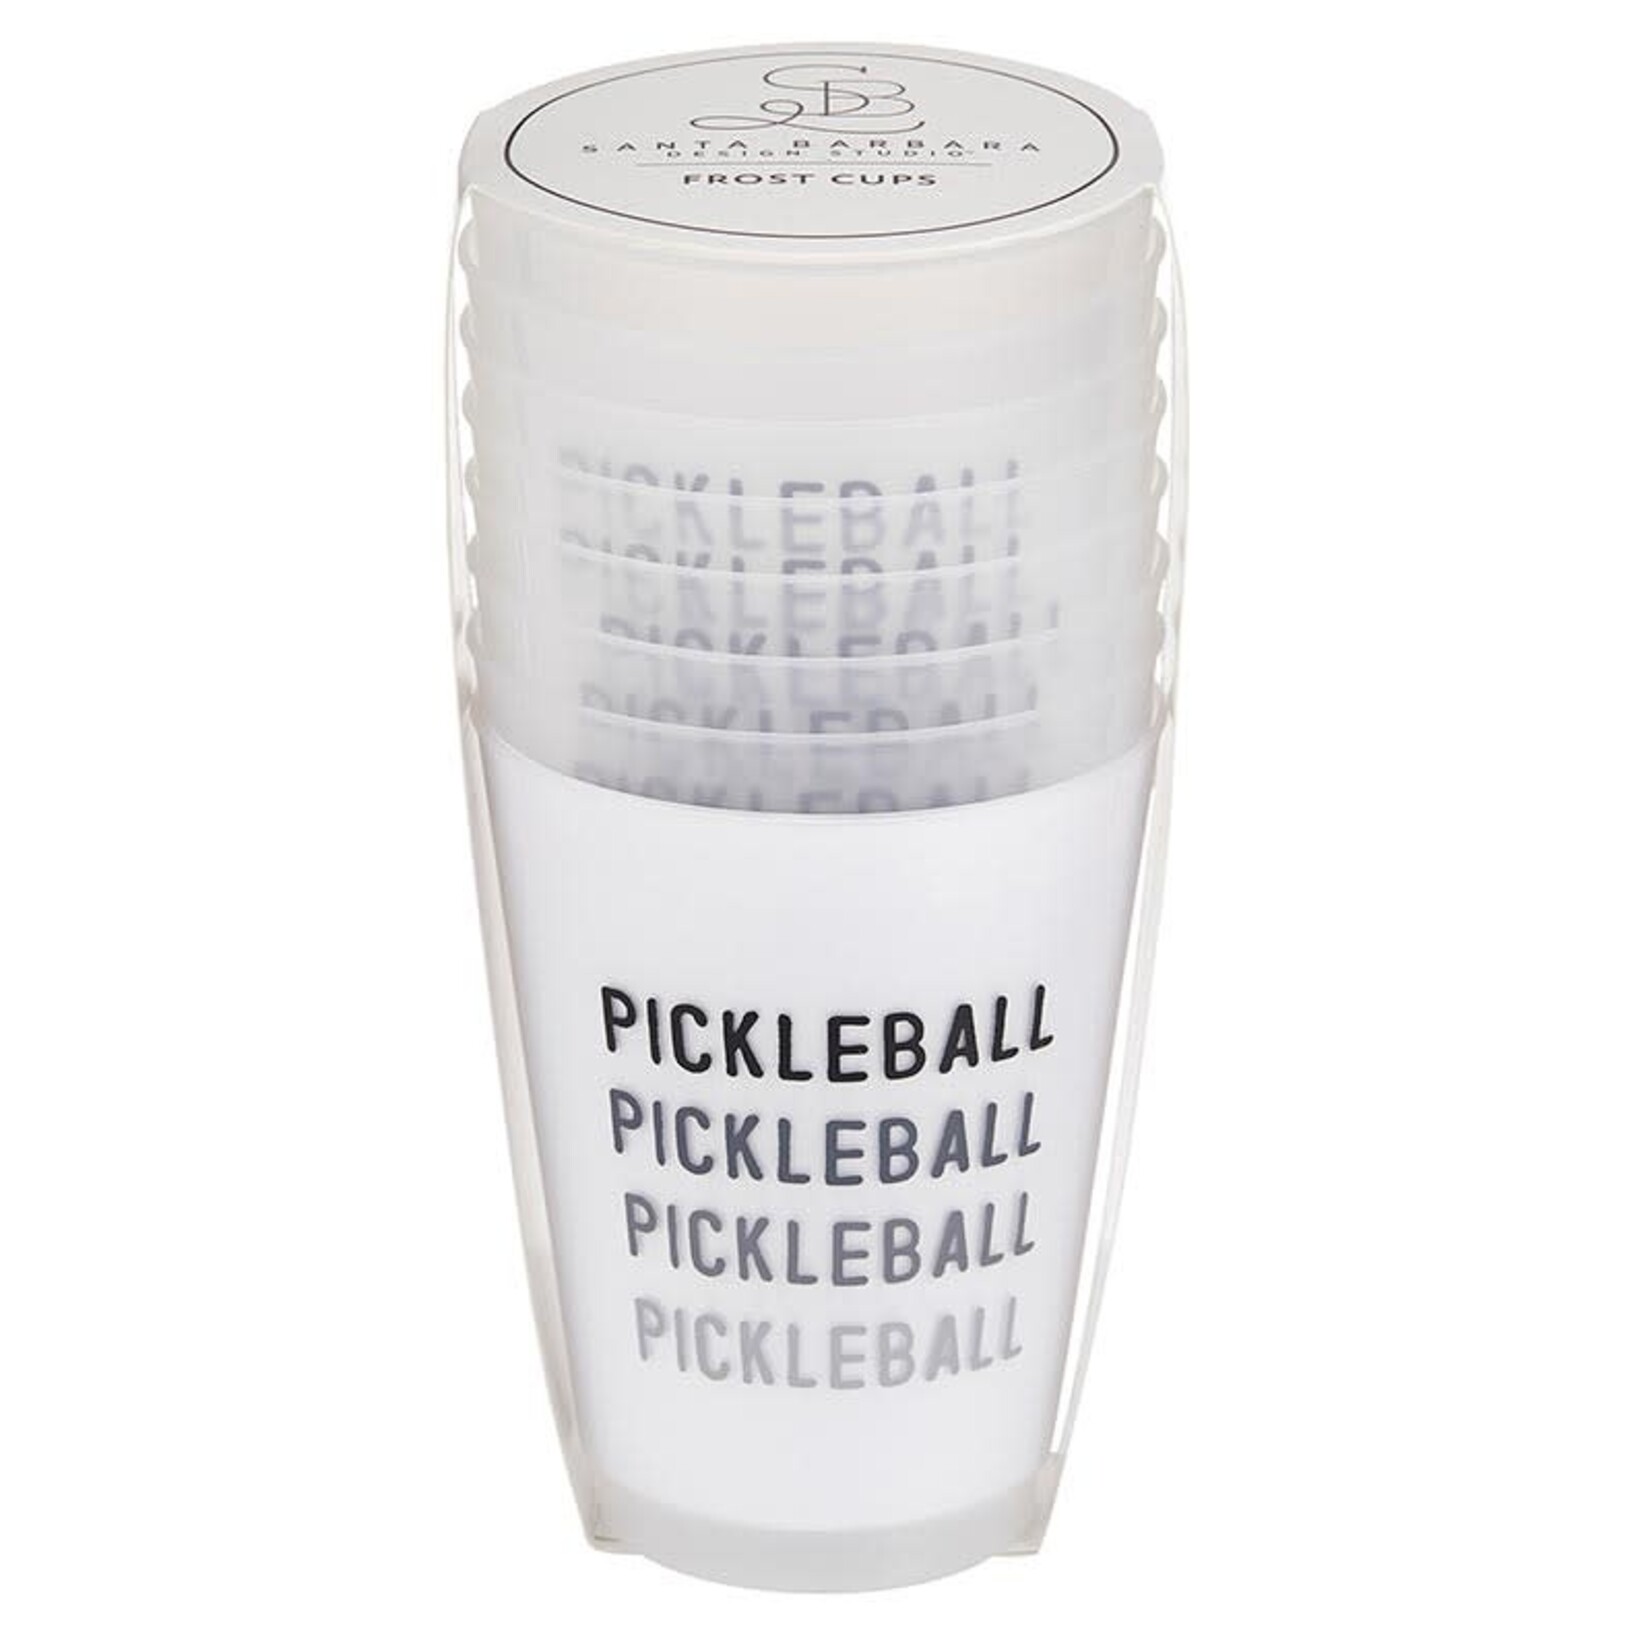 Frost Cup - Pickleball 8 pk